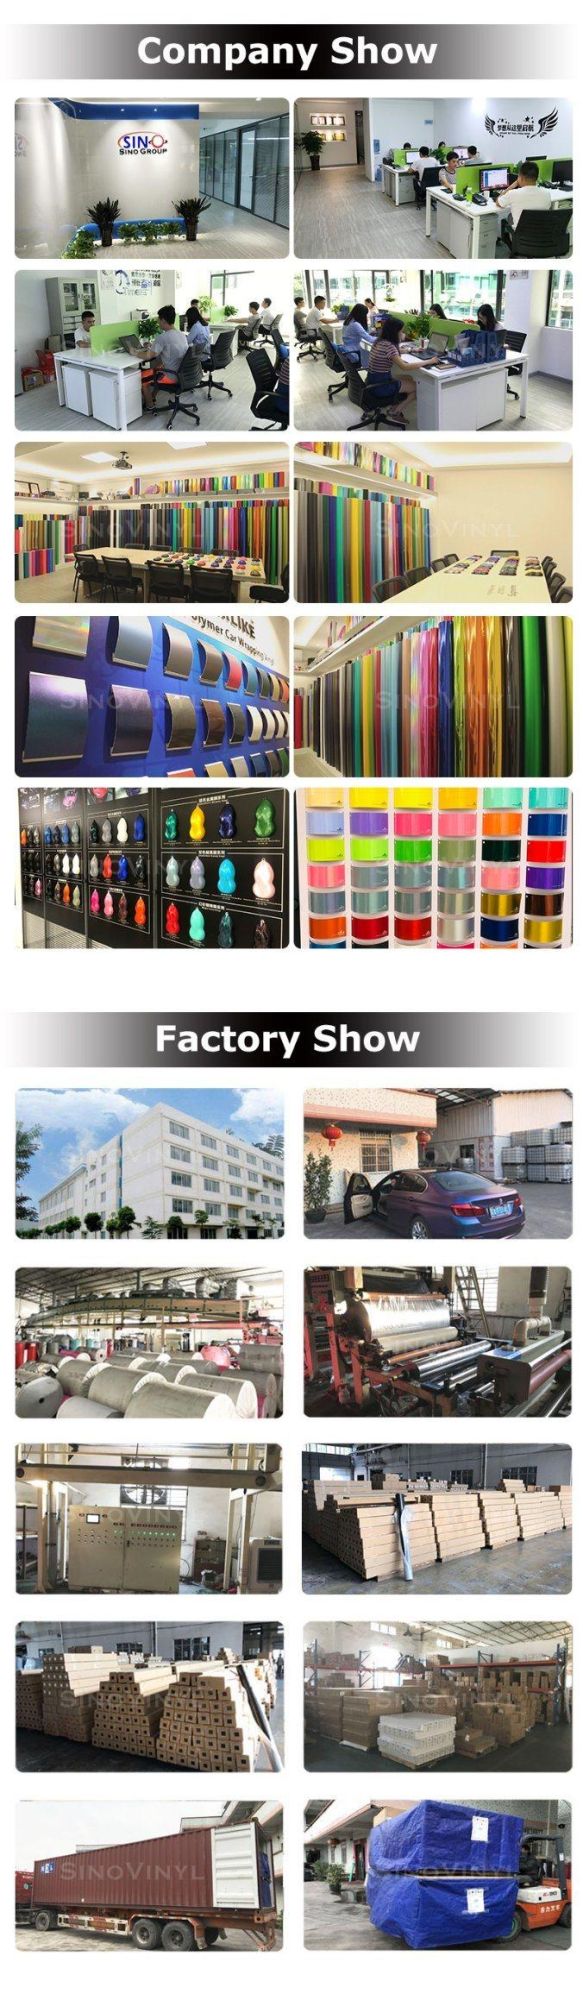 SINOVINY Banner Graphic Factory Price Cricut Self Adhesive Cutting Vinyl Film For Poster Sign